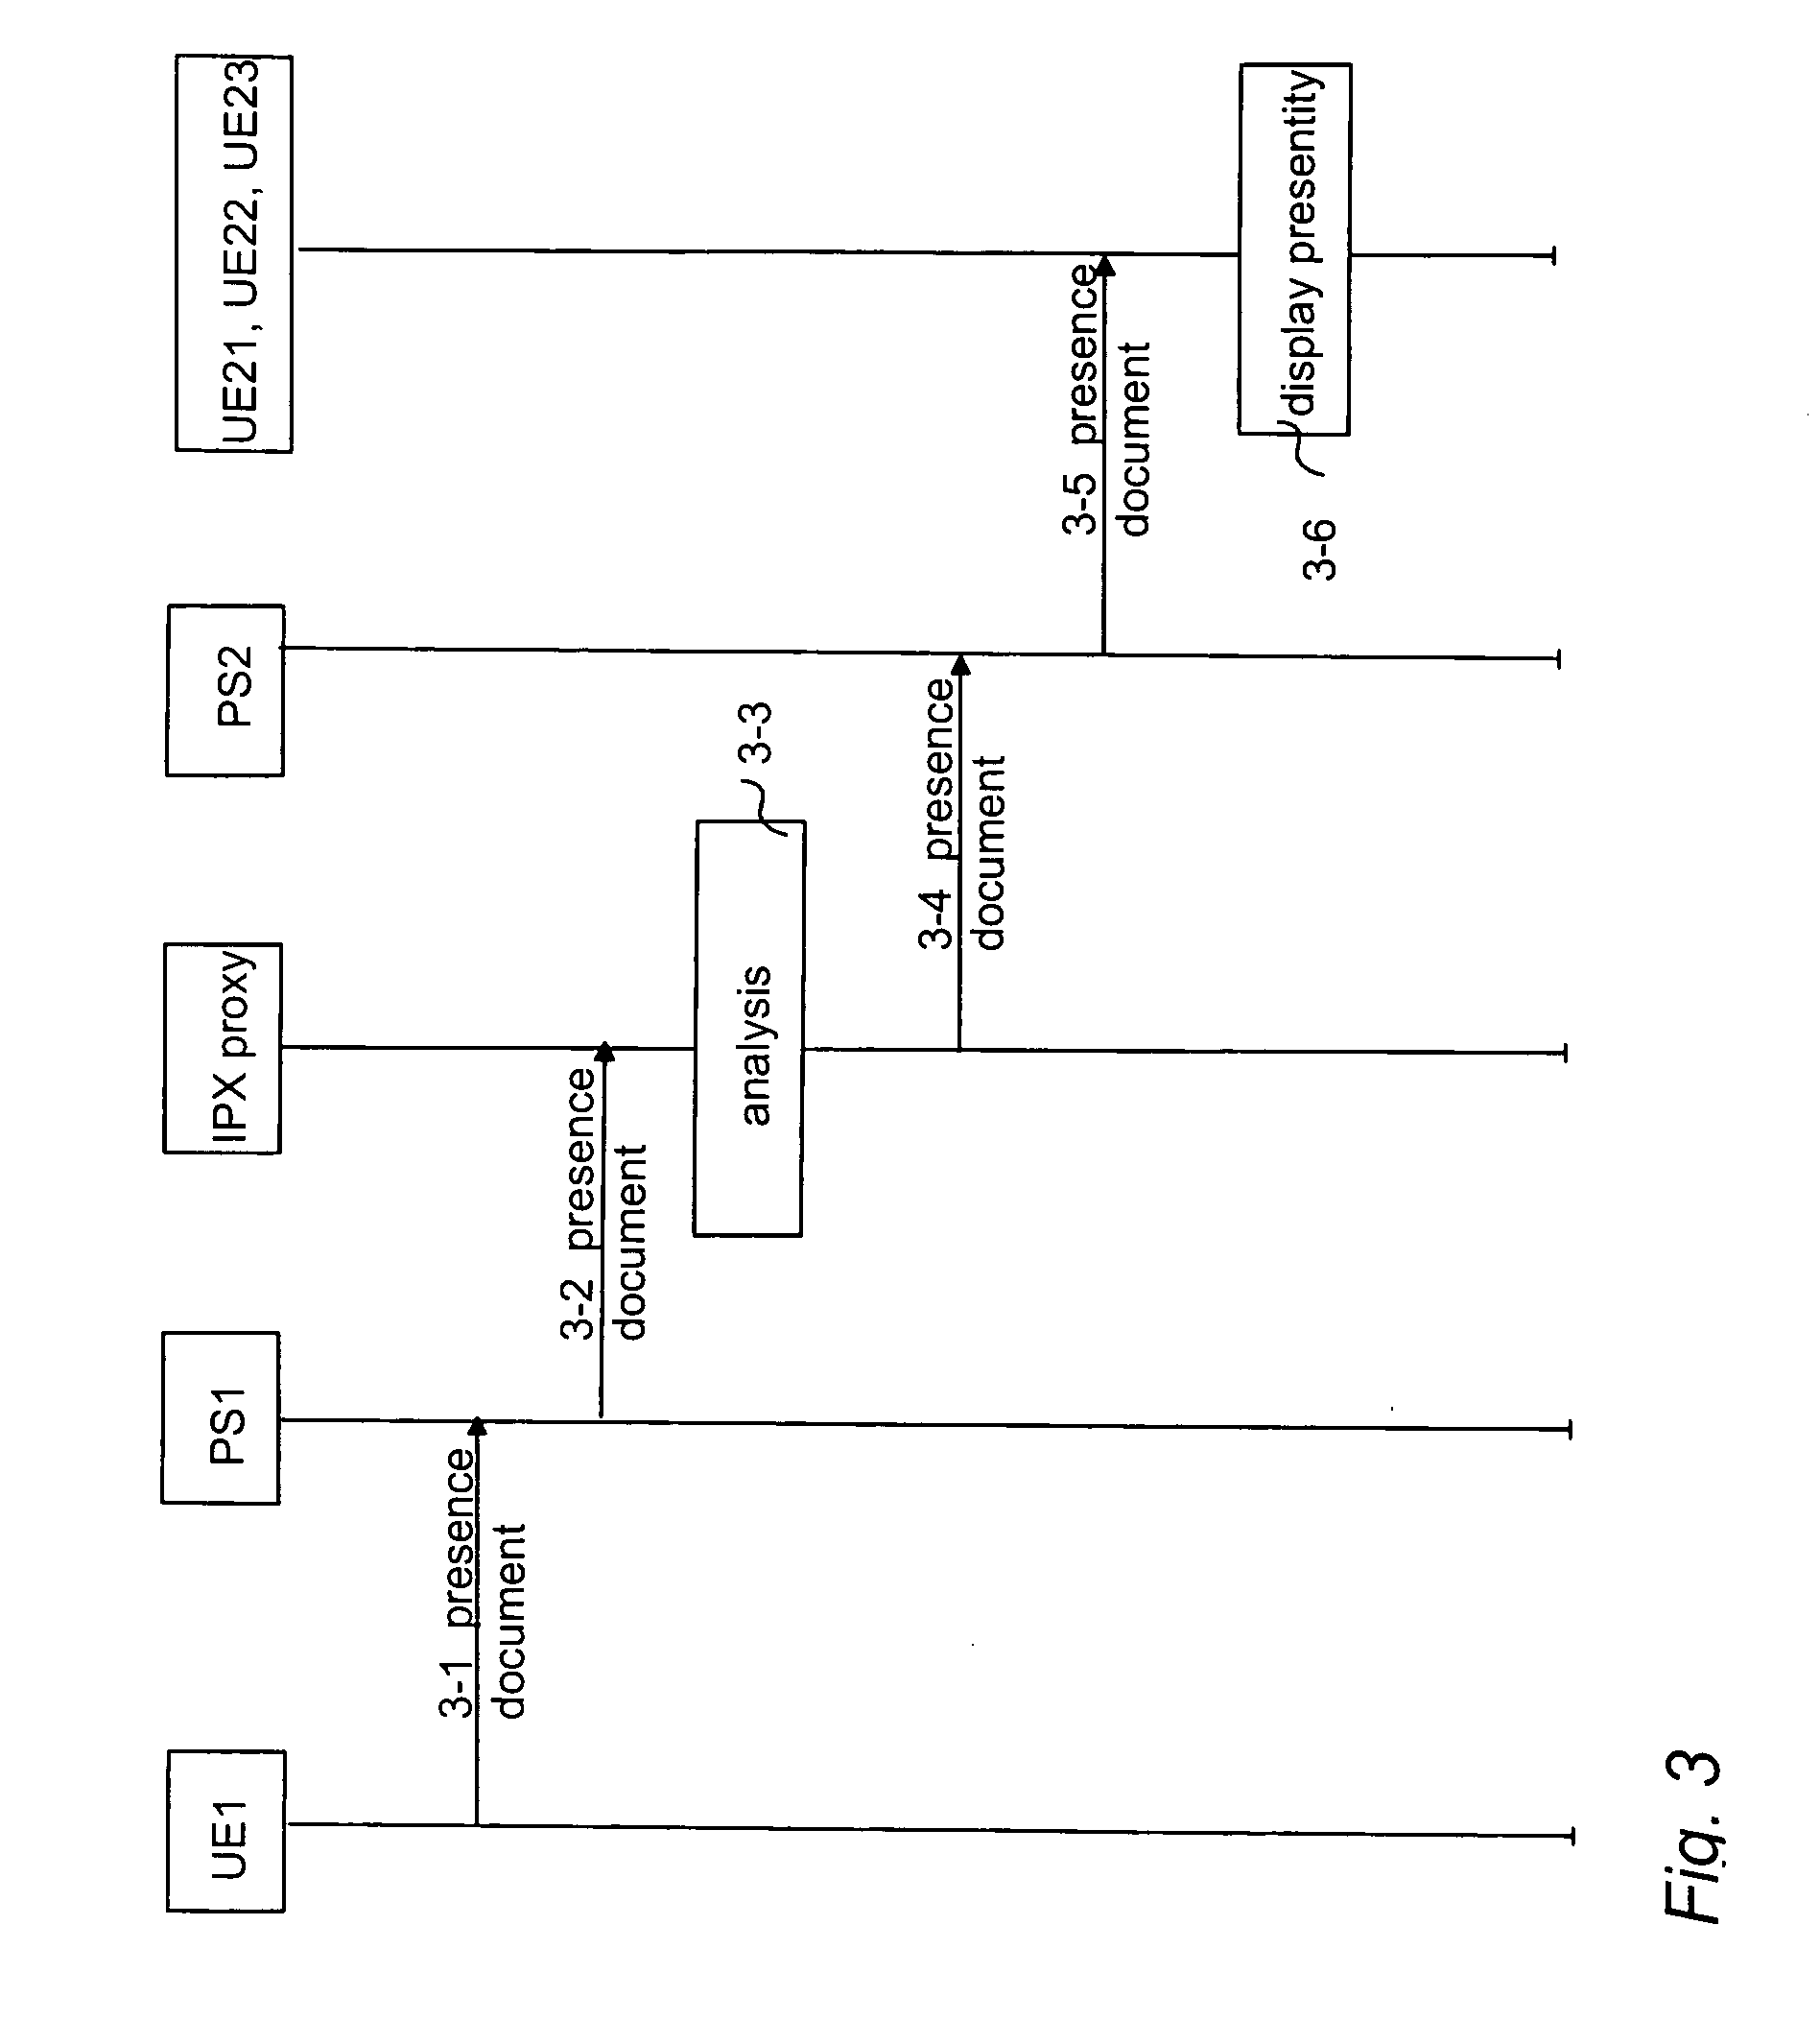 Managing presence information in a communications system